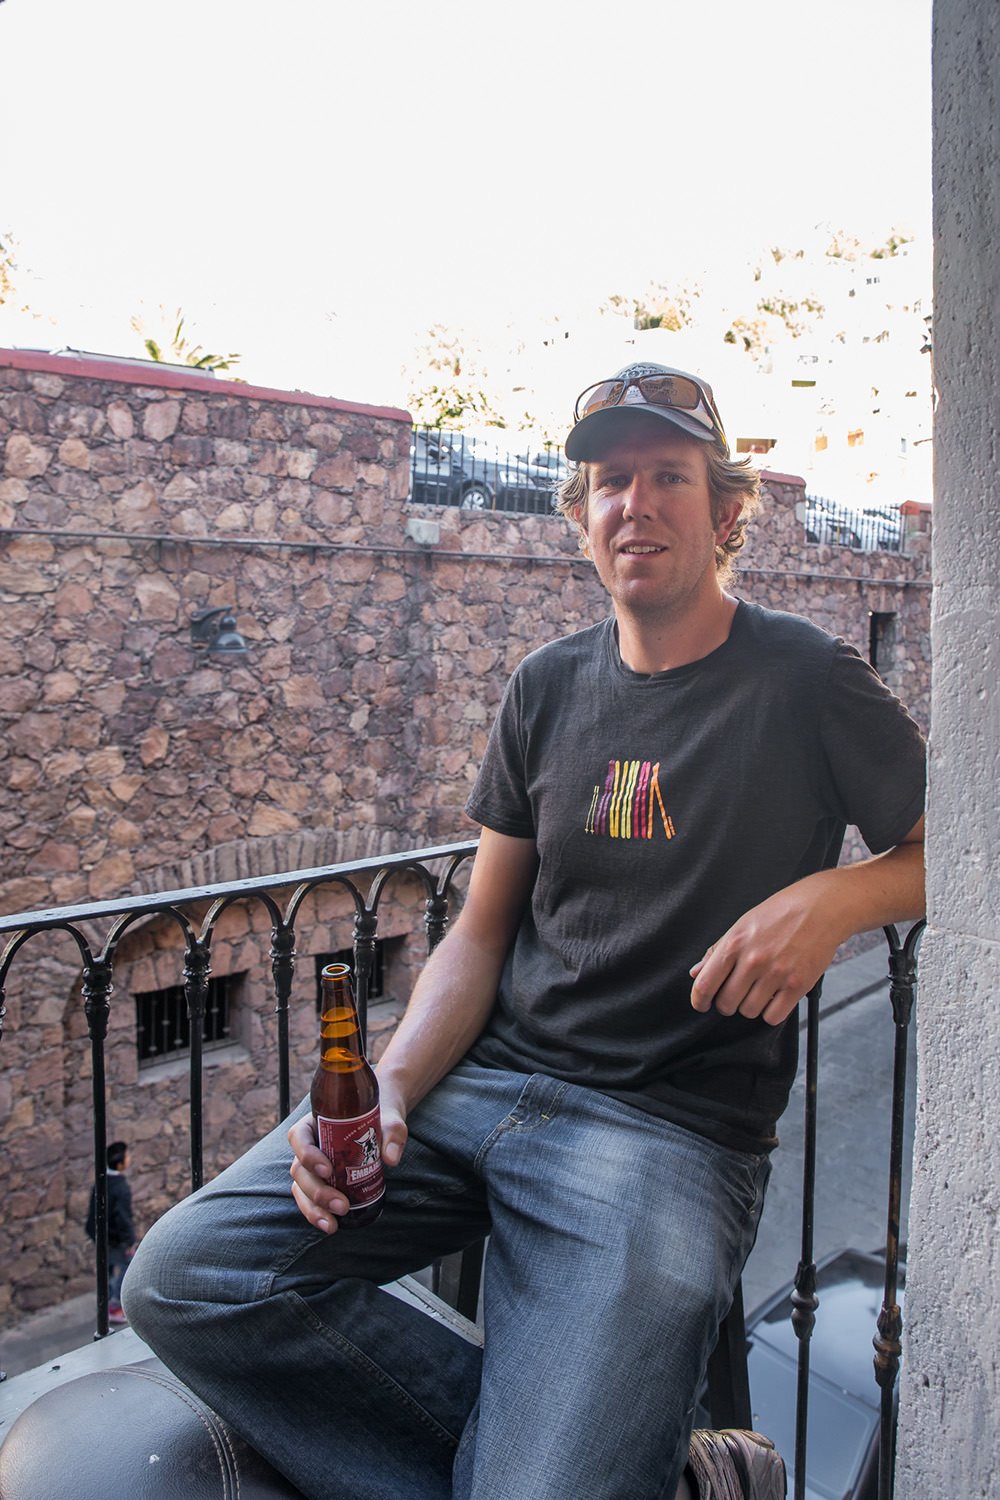 Stopping for a craft brew on a tiny balcony at Oveja Negra.